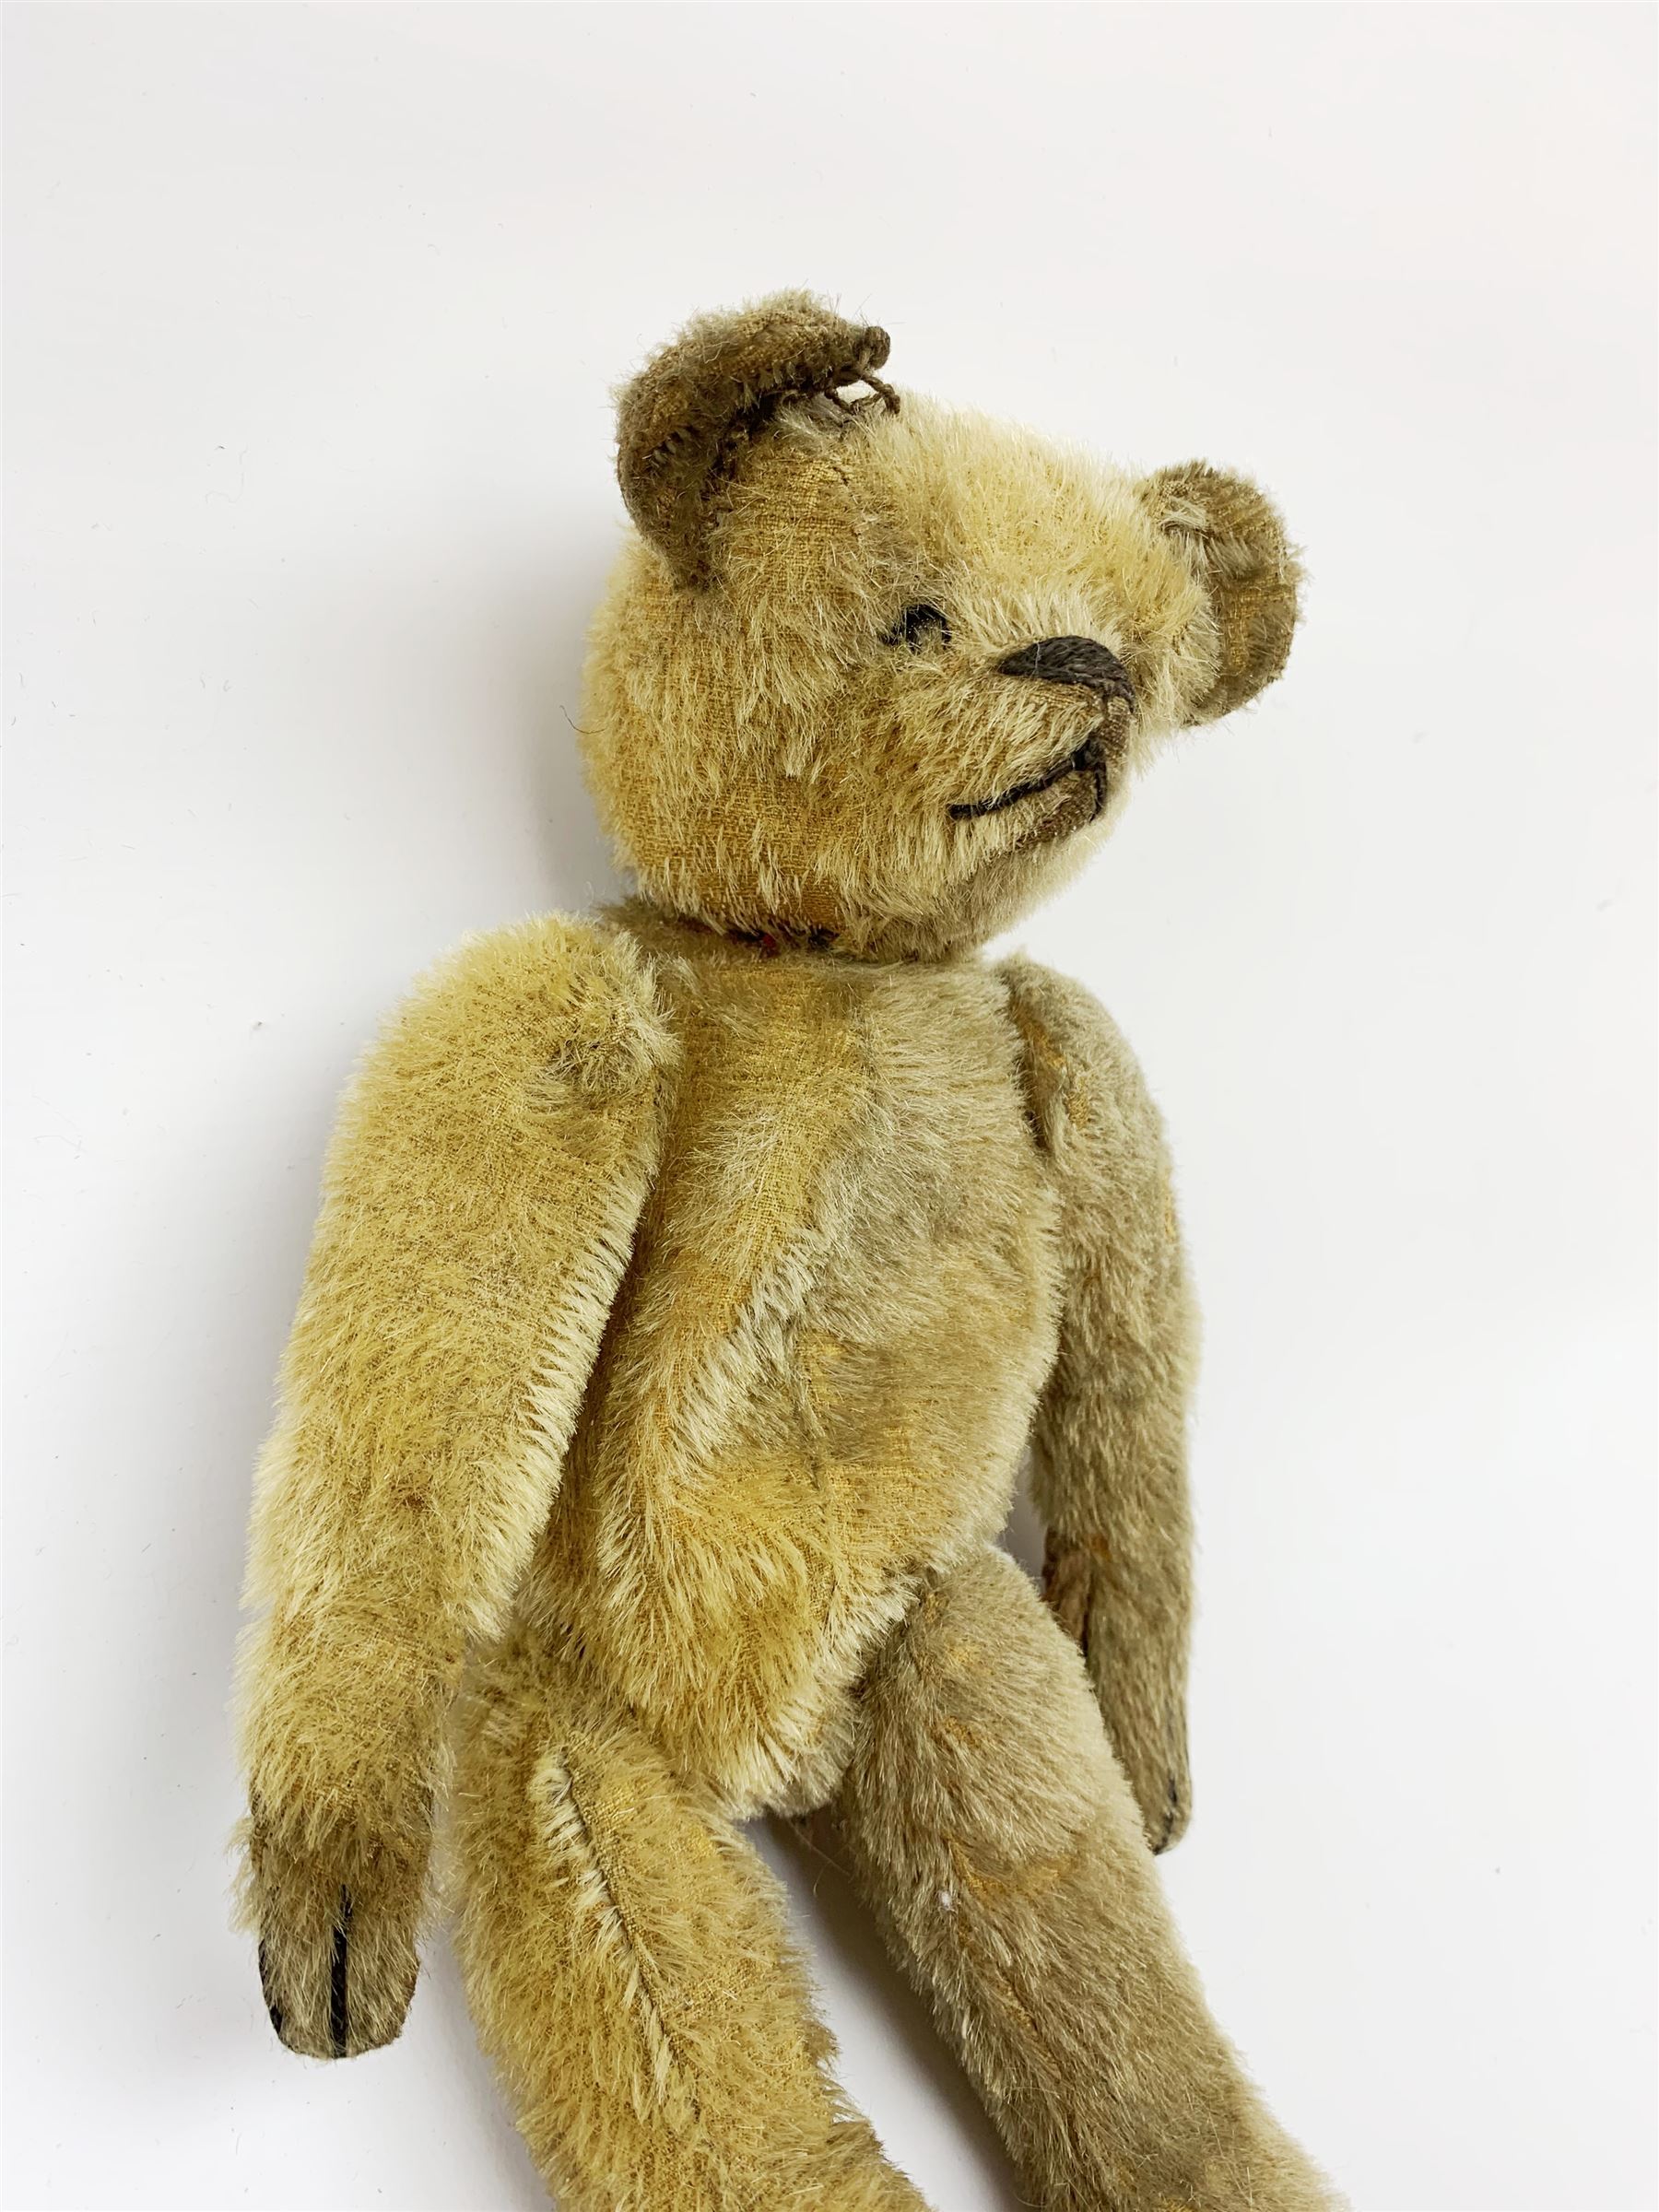 Early 20th century American mohair teddy bear c1920 with wood wool filled body humped back body with - Image 2 of 8